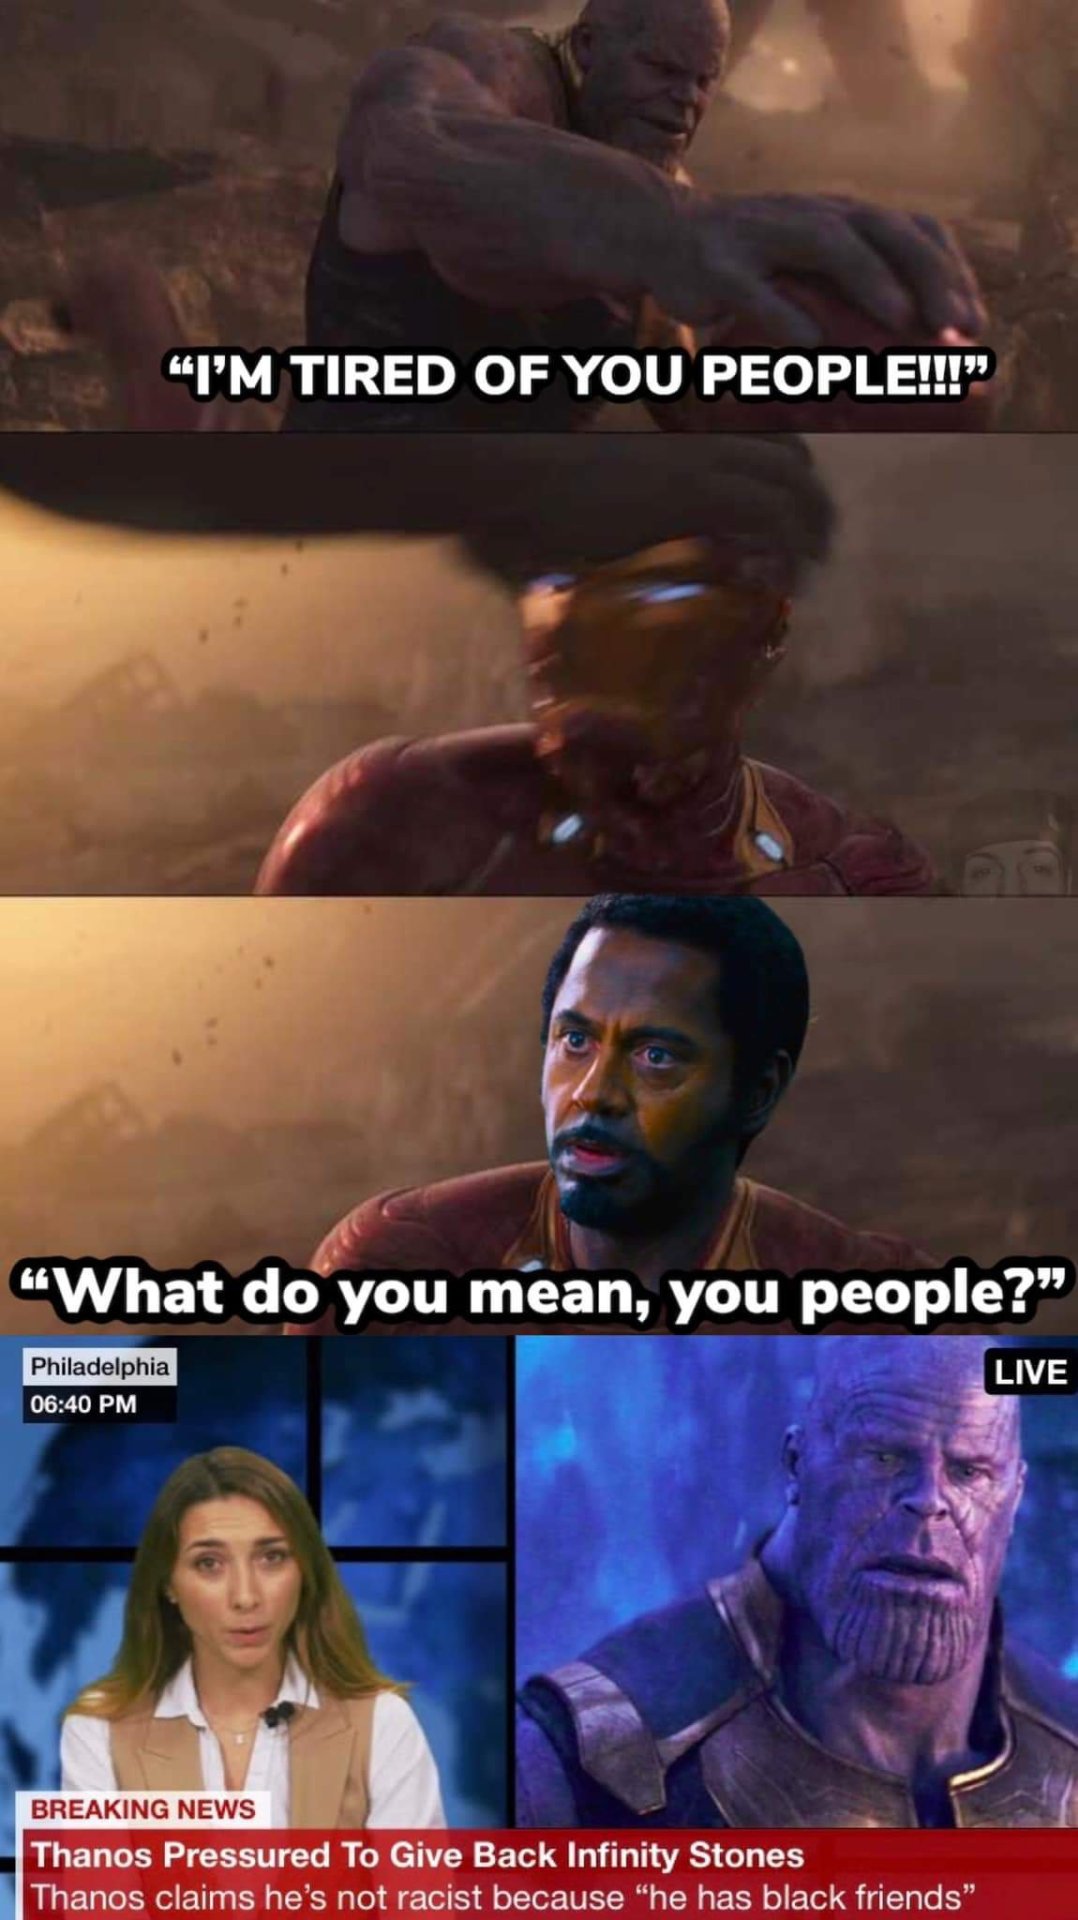 thanos racist meme - "I'M Tired Of You People!!! What do you mean, you people?" Philadelphia Live Breaking News Thanos Pressured To Give Back Infinity Stones Thanos claims he's not racist because "he has black friends"